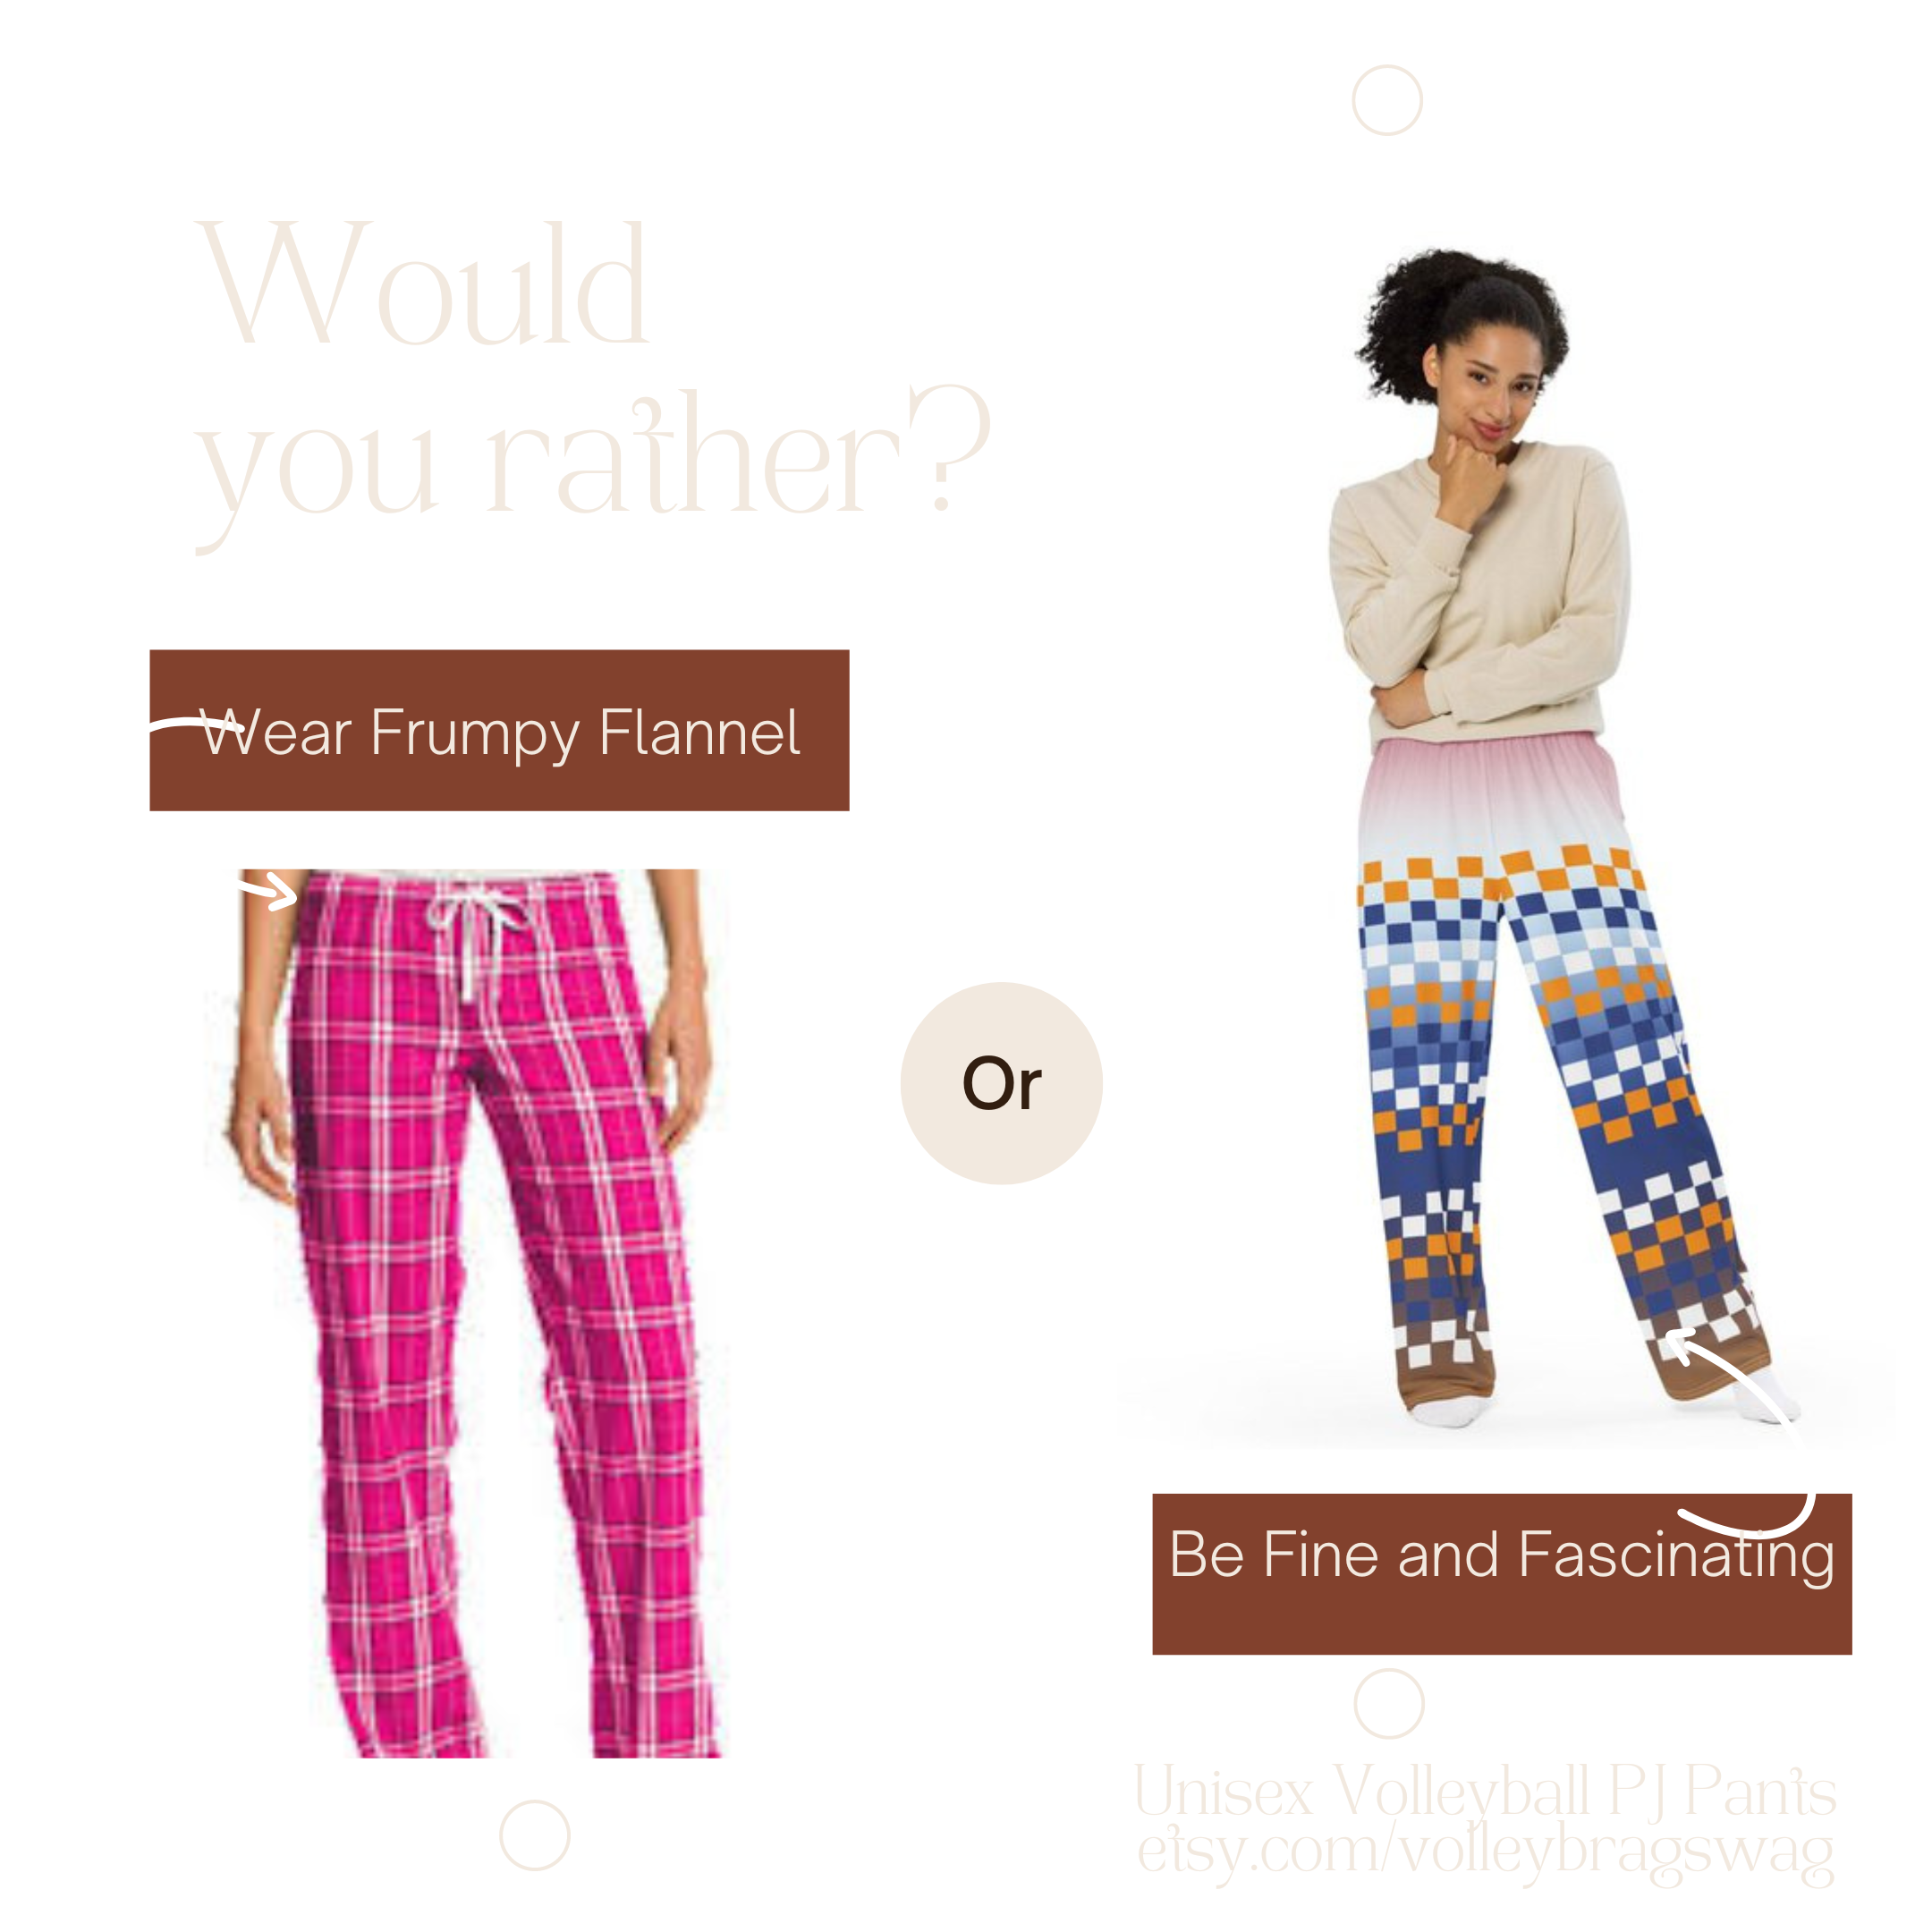 Get the comfort of pajamas in this stylish pair of wide-leg pants. With the adjustable waist and stretchy fabric, it’s like your favorite sweatpants but better.